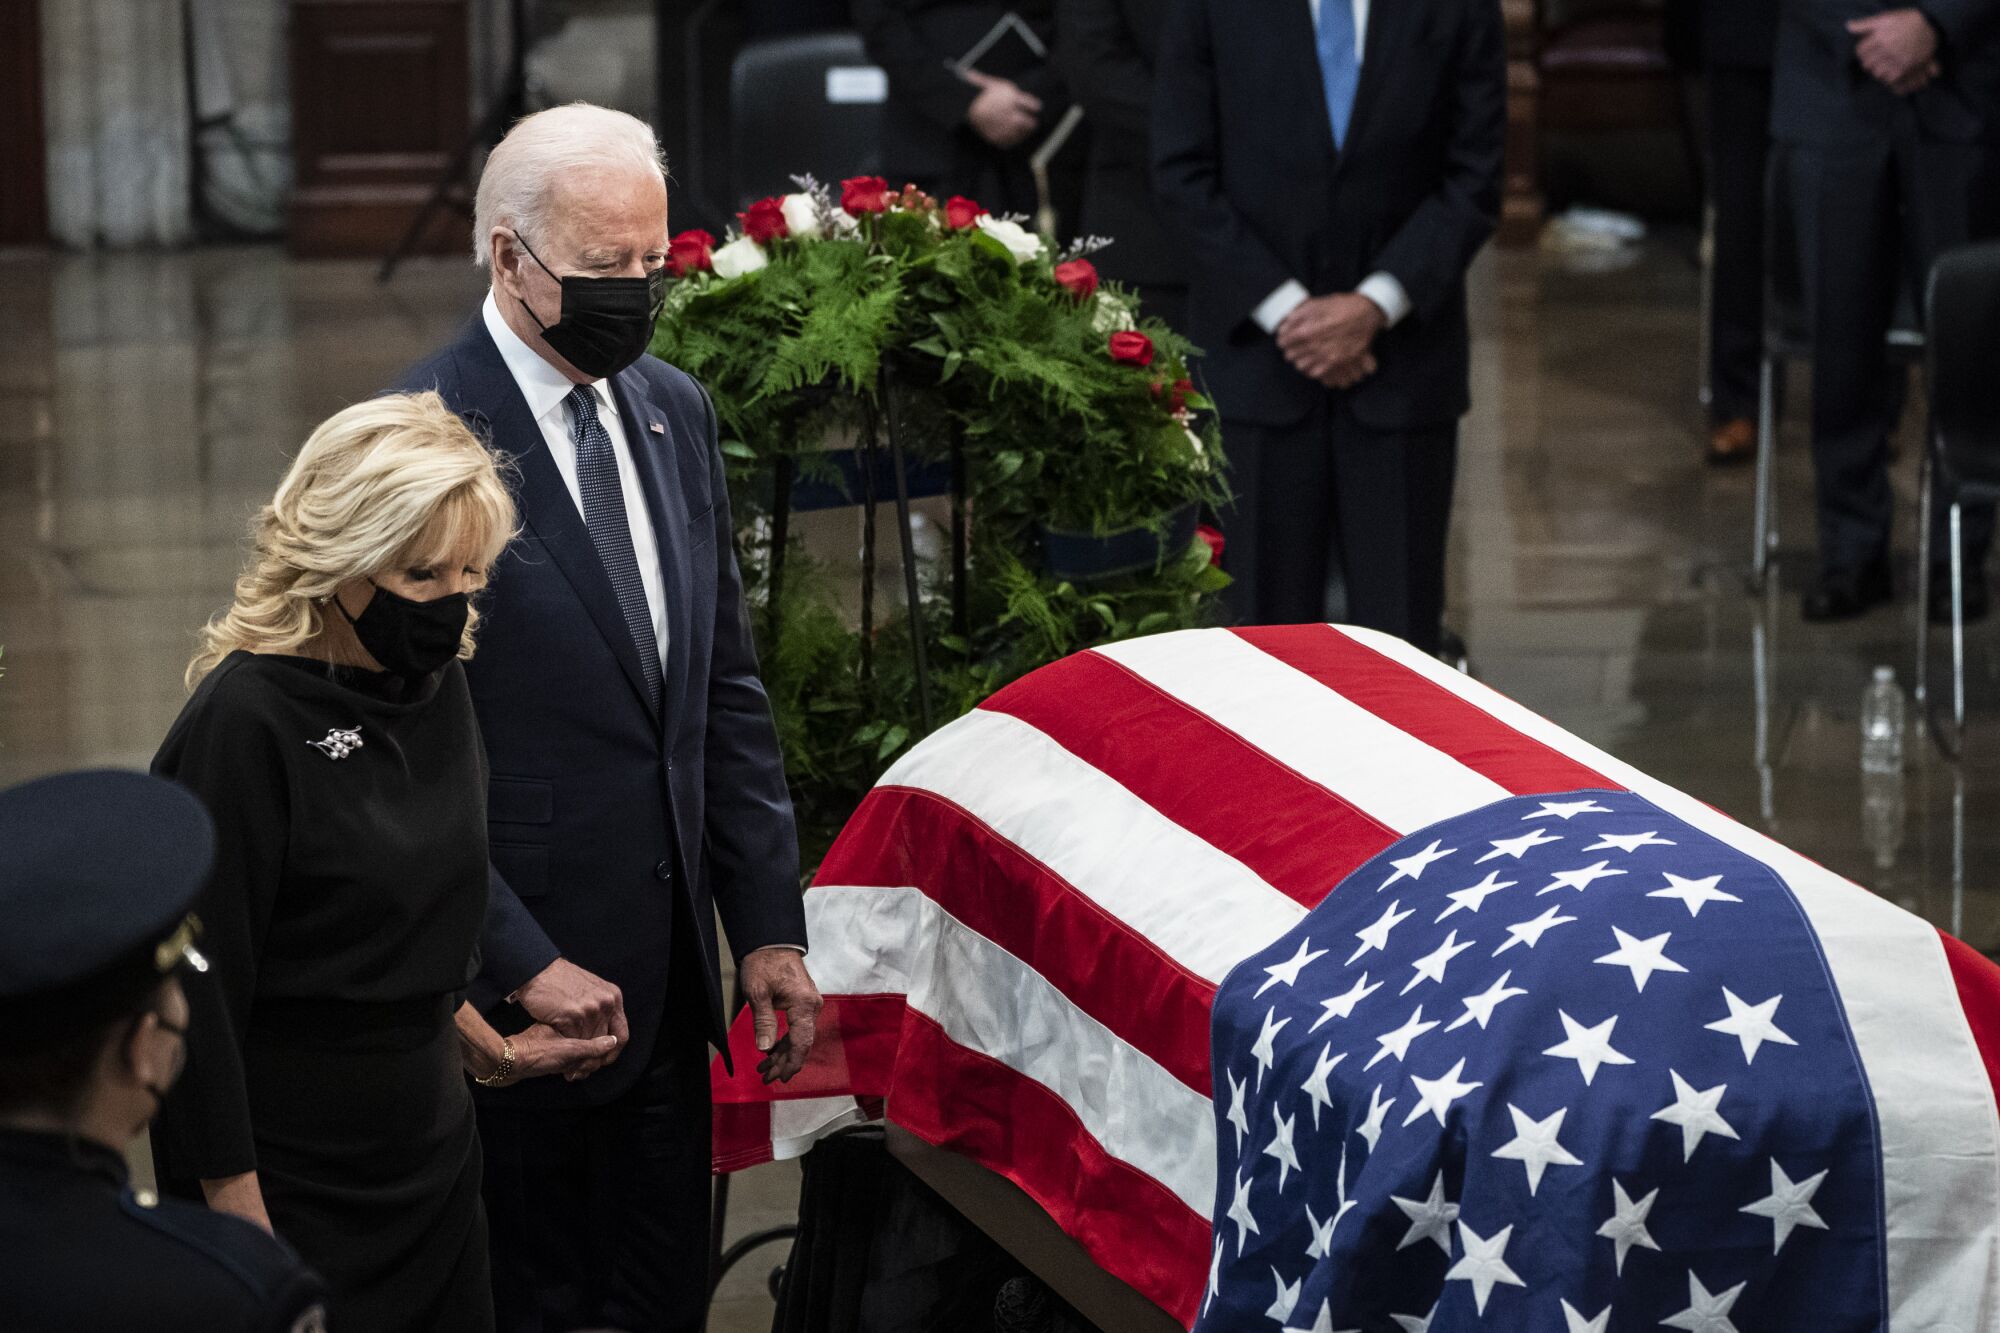 President Biden and First Lady Jill Biden stand next to the U.S. flag-draped coffin of Bob Dole.